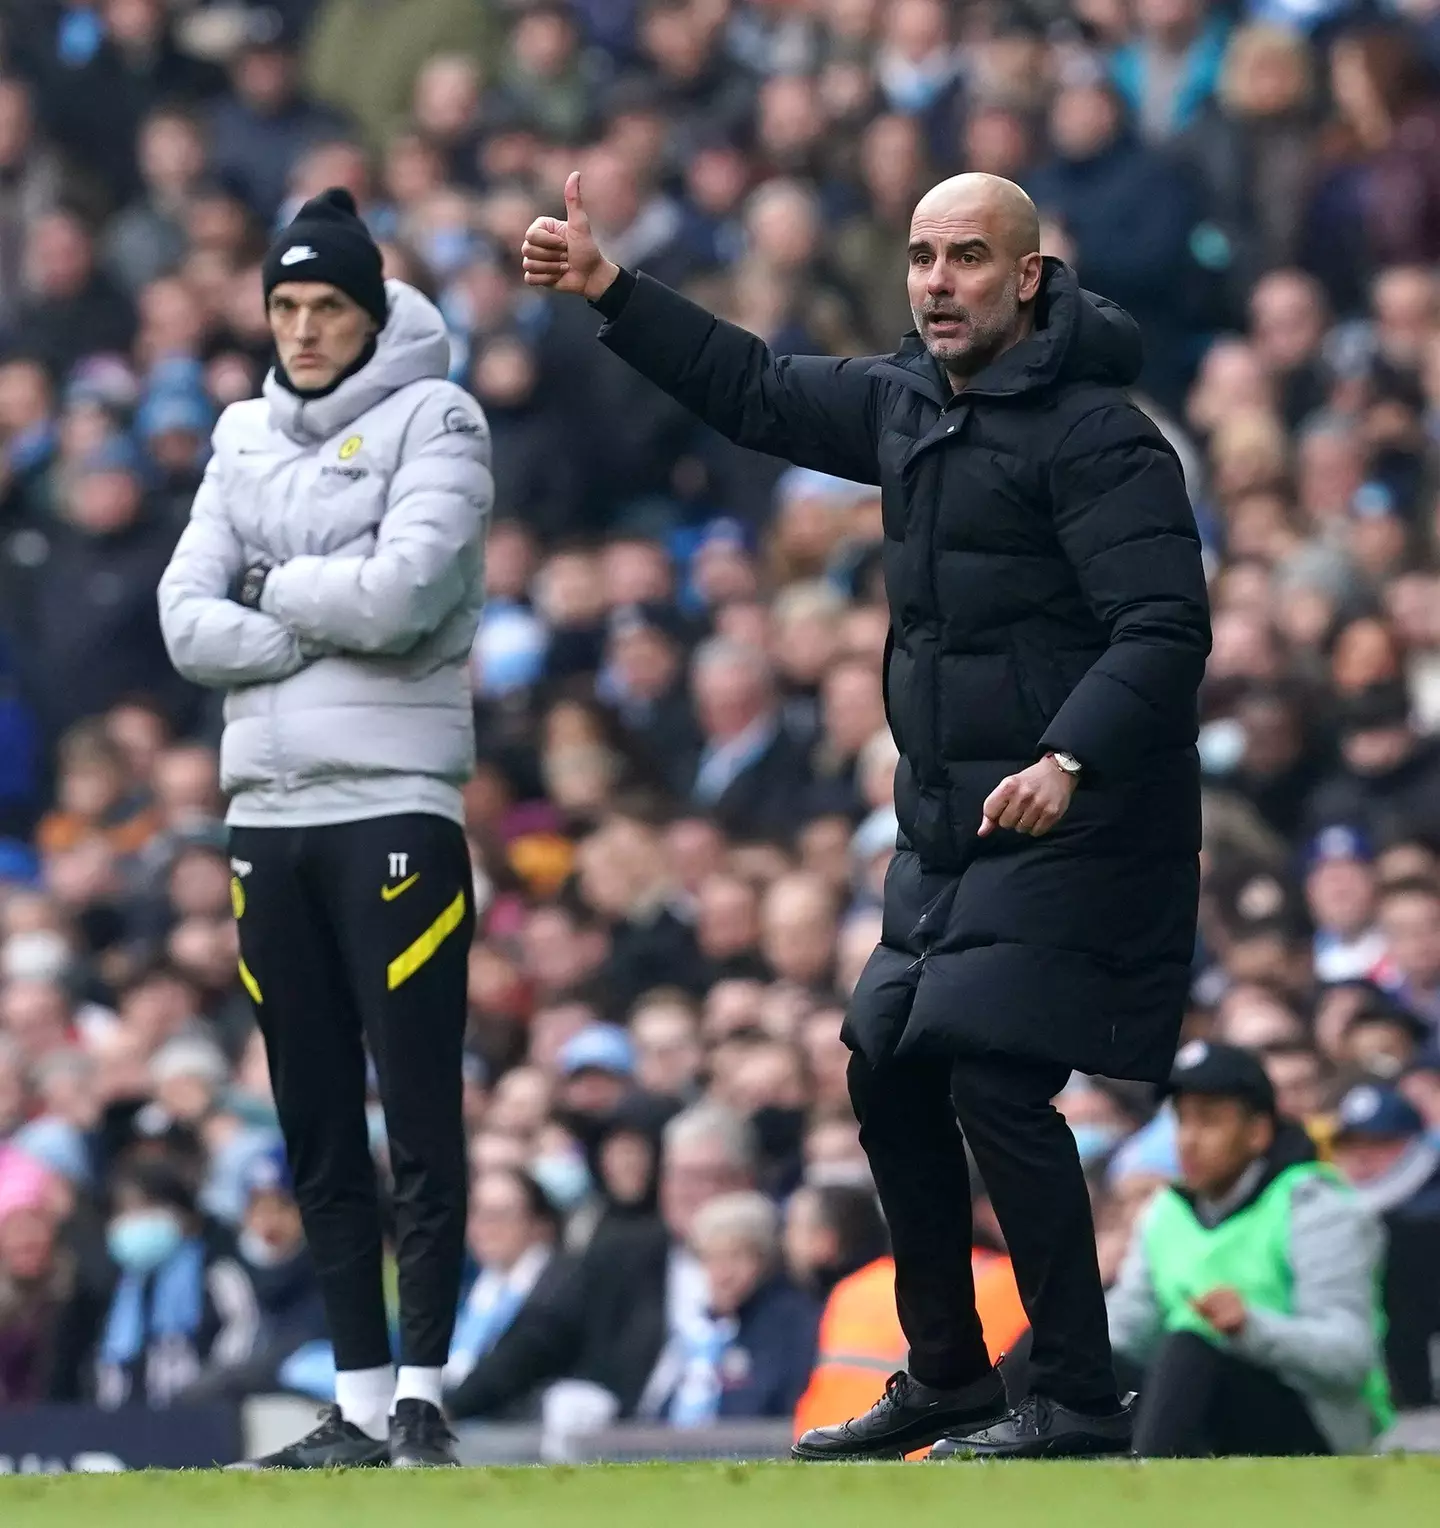 Tuchel says he understands Guardiola's point of view (Image: PA)